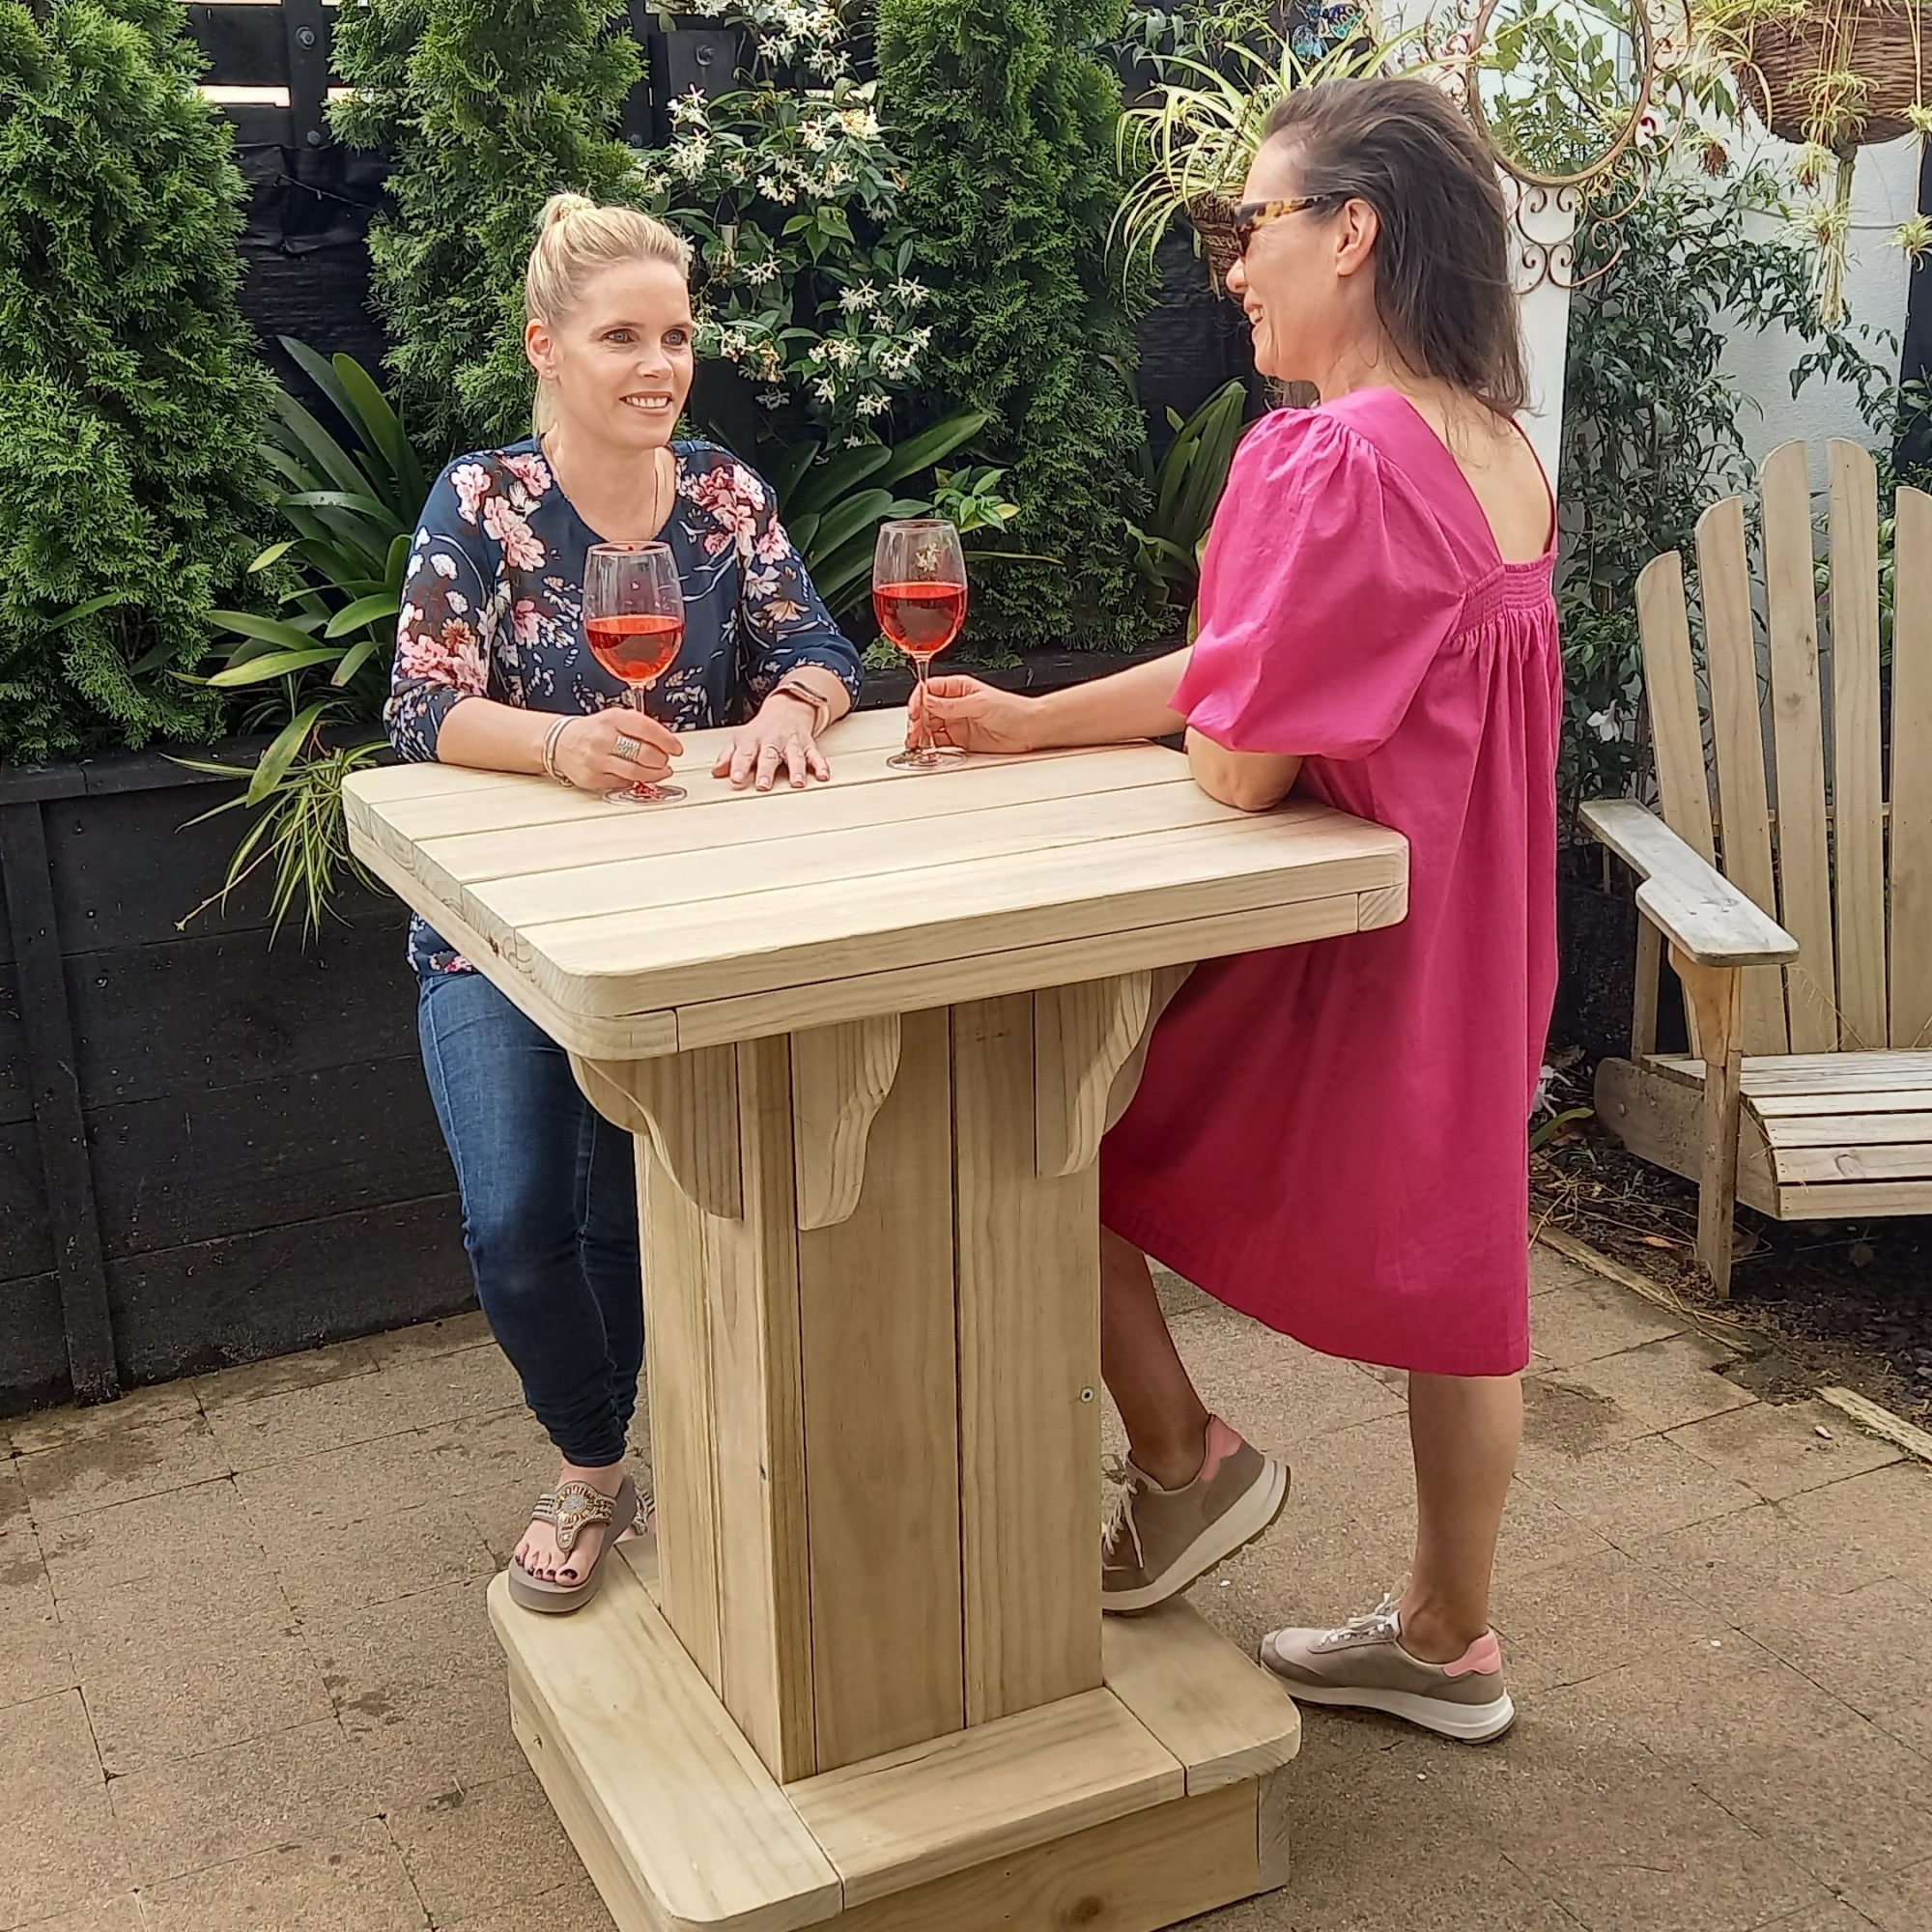 The Appeal of Pub Tables: A Cozy and Social Gathering Spot